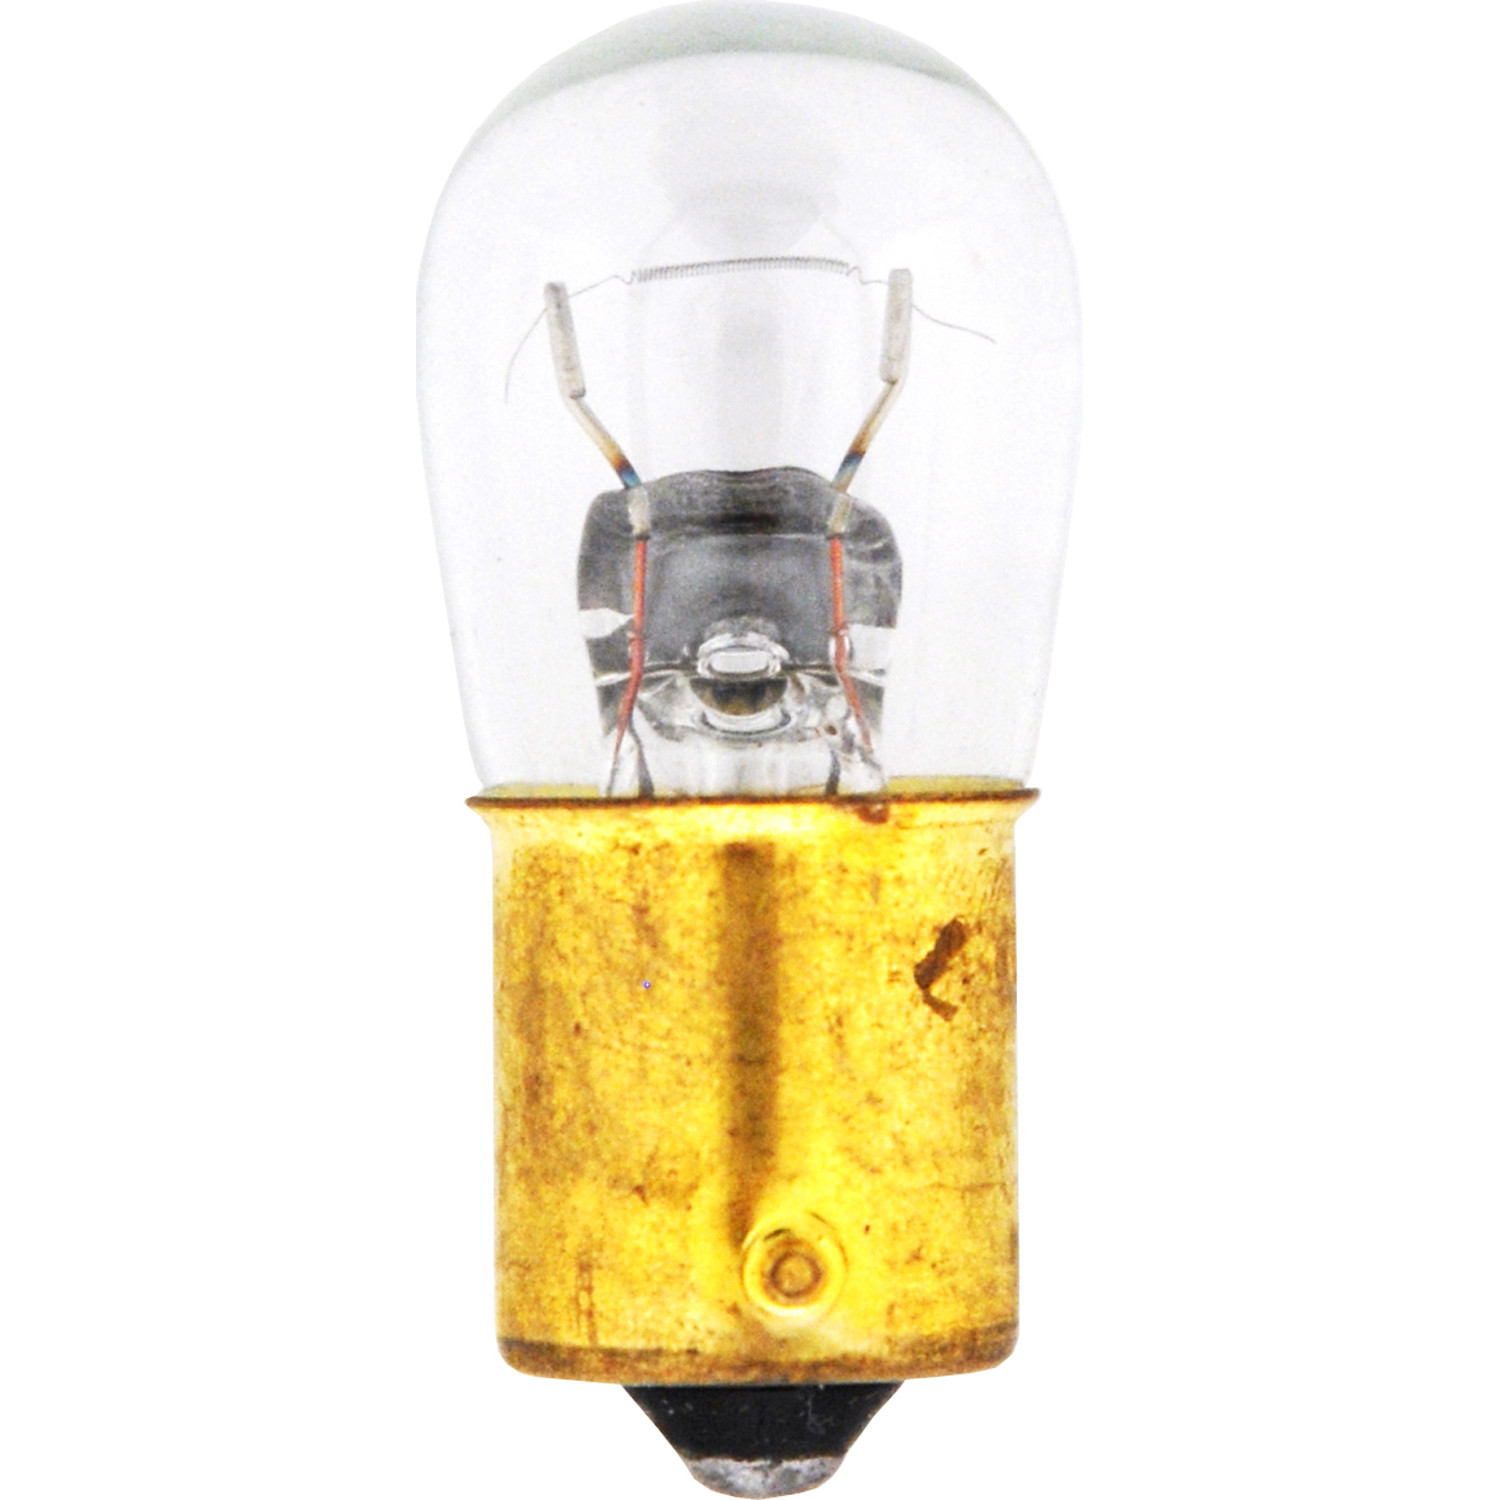 SYLVANIA RETAIL PACKS - Blister Pack Twin Engine Compartment Light Bulb - SYR 1003.BP2